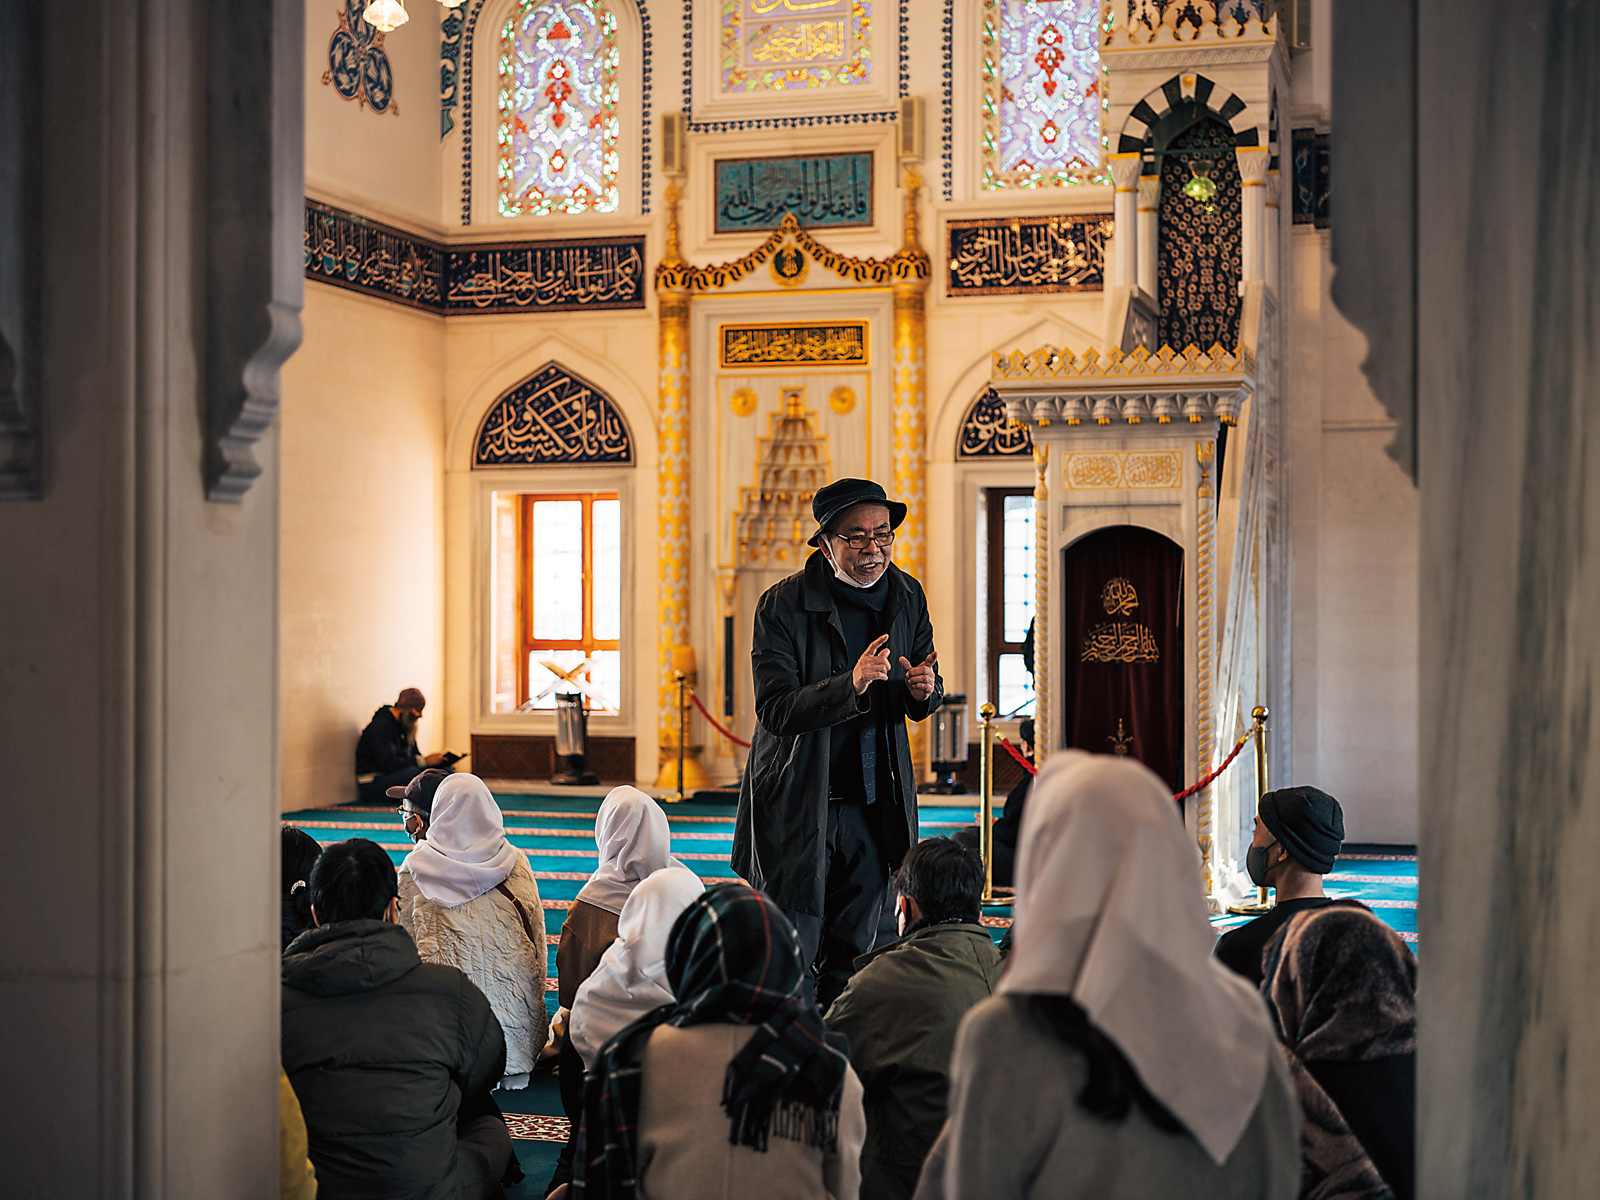 Shigeru Shimoyama, a public affairs officer at Tokyo Camii, explains the mosque’s history to a group of visitors in the main prayer hall. 